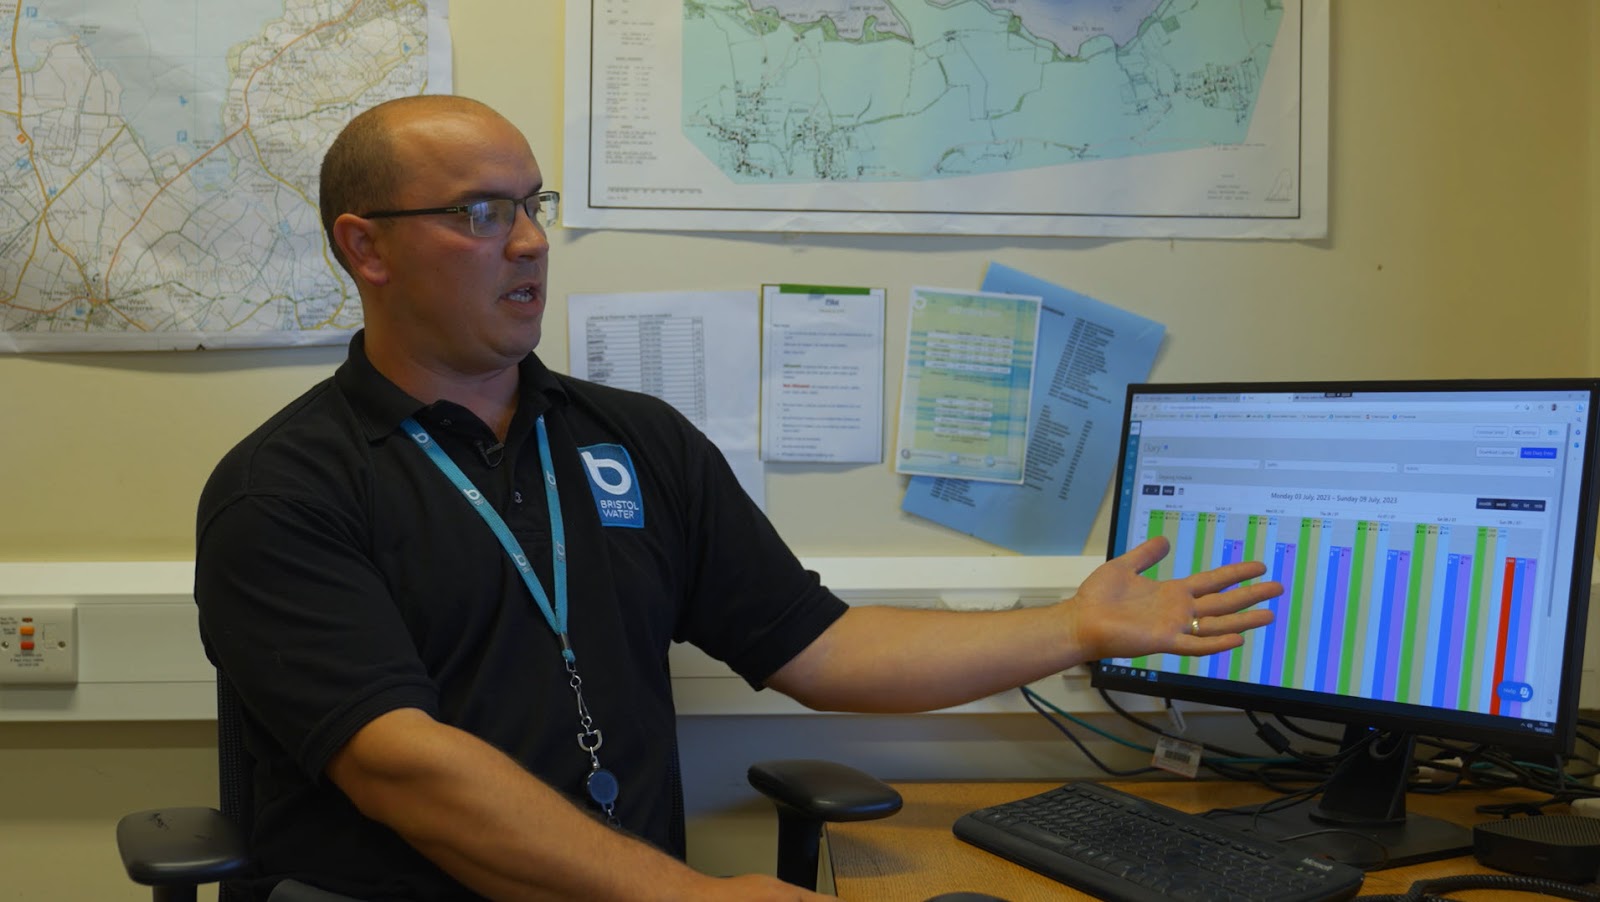 A member of staff at Bristol Water Fisheries talks about their bookings system.